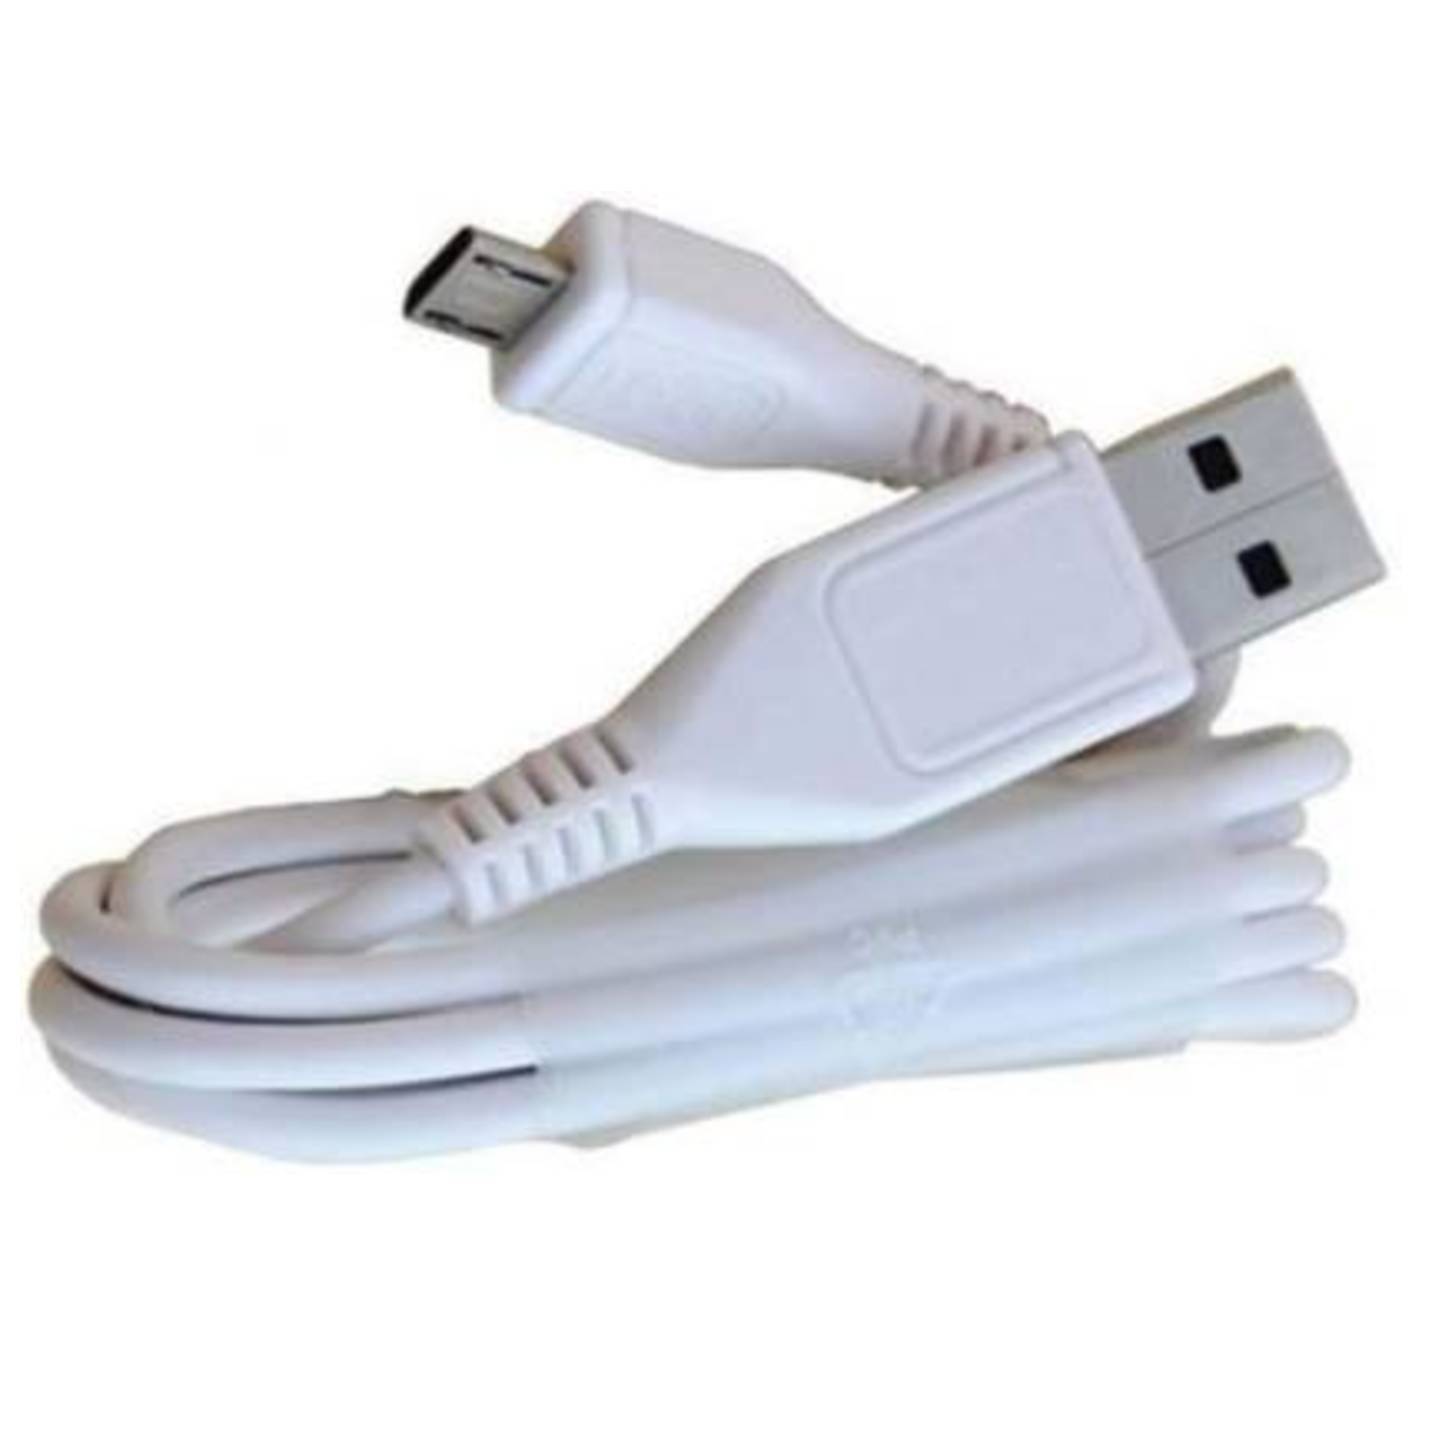 Fast Charging vivo Y91i, Y91, Y93, V9 Youth, Y81, Y66 Charging Cable Data Transfer Fast Cable 1.2 m Micro USB Cable  (Compatible with ALL MOBILE DEVICES, Off White, One Cable)